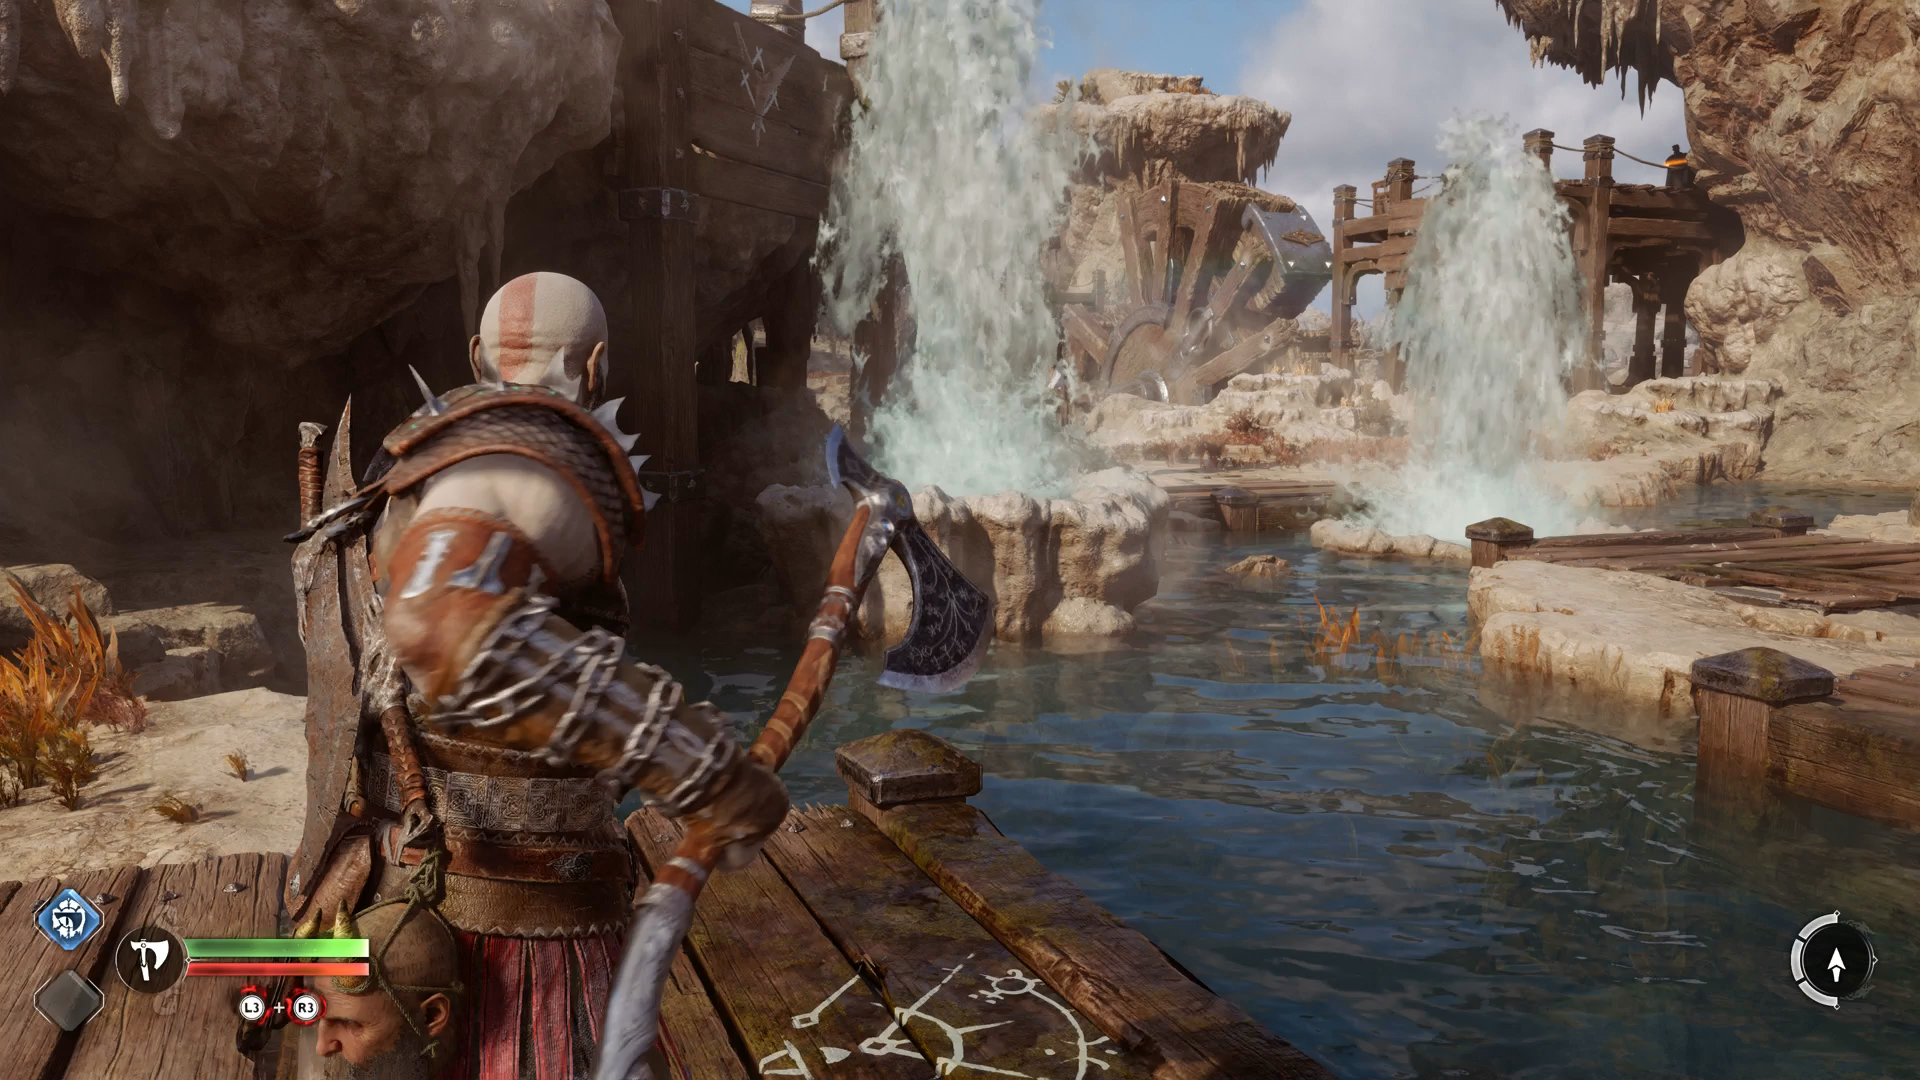 A view of the water vents that need to be capped to solve the water wheel puzzle in God of War Ragnarok